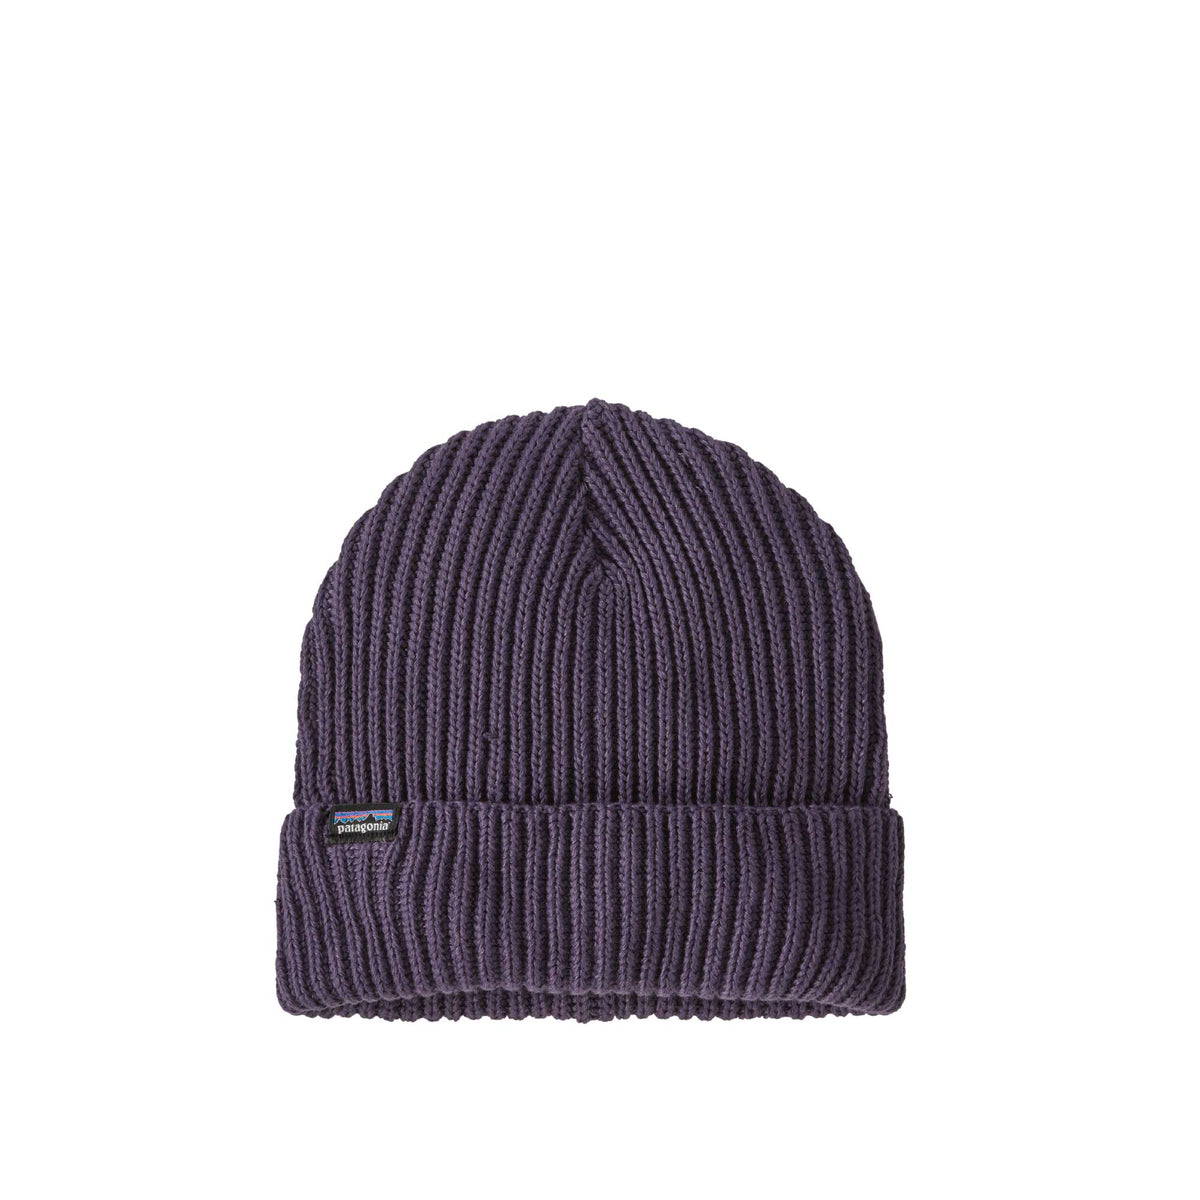 Patagonia Fisherman's Rolled Beanie in Crisp Grey - Winter Beanies - Polyester